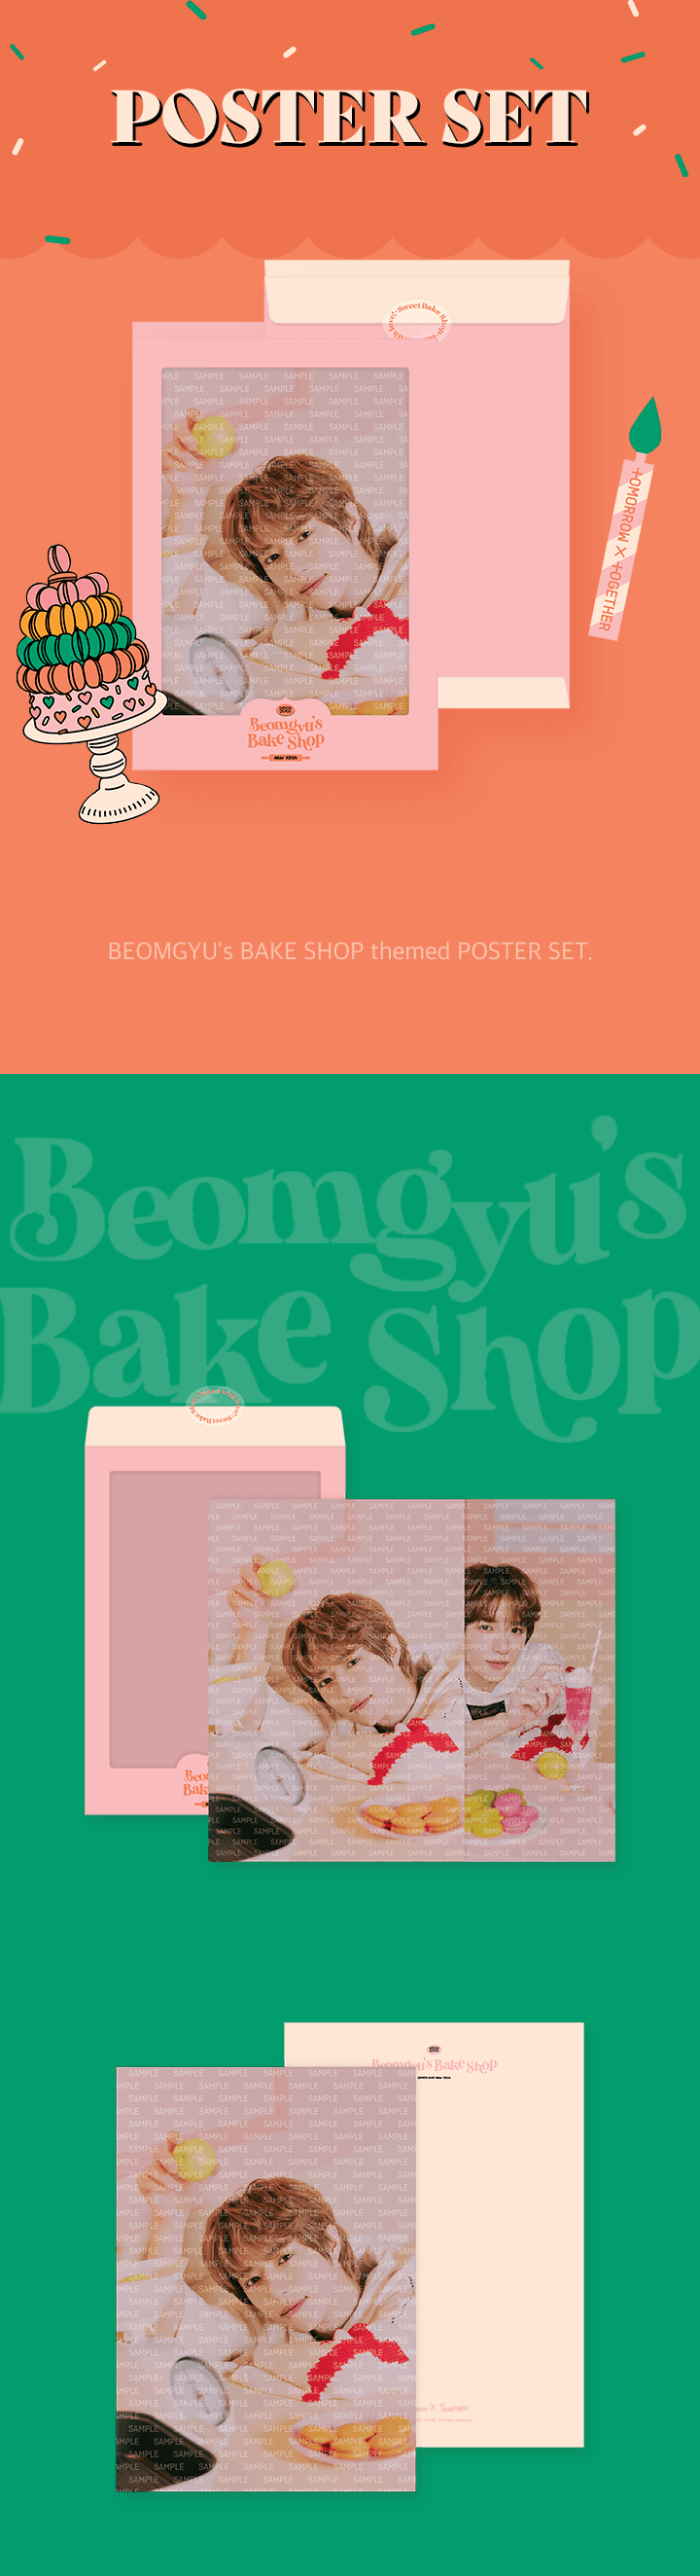 Tomorrow x Together (TXT) - BIRTHDAY OFFICIAL MD BEOMGYU'S BAKE 